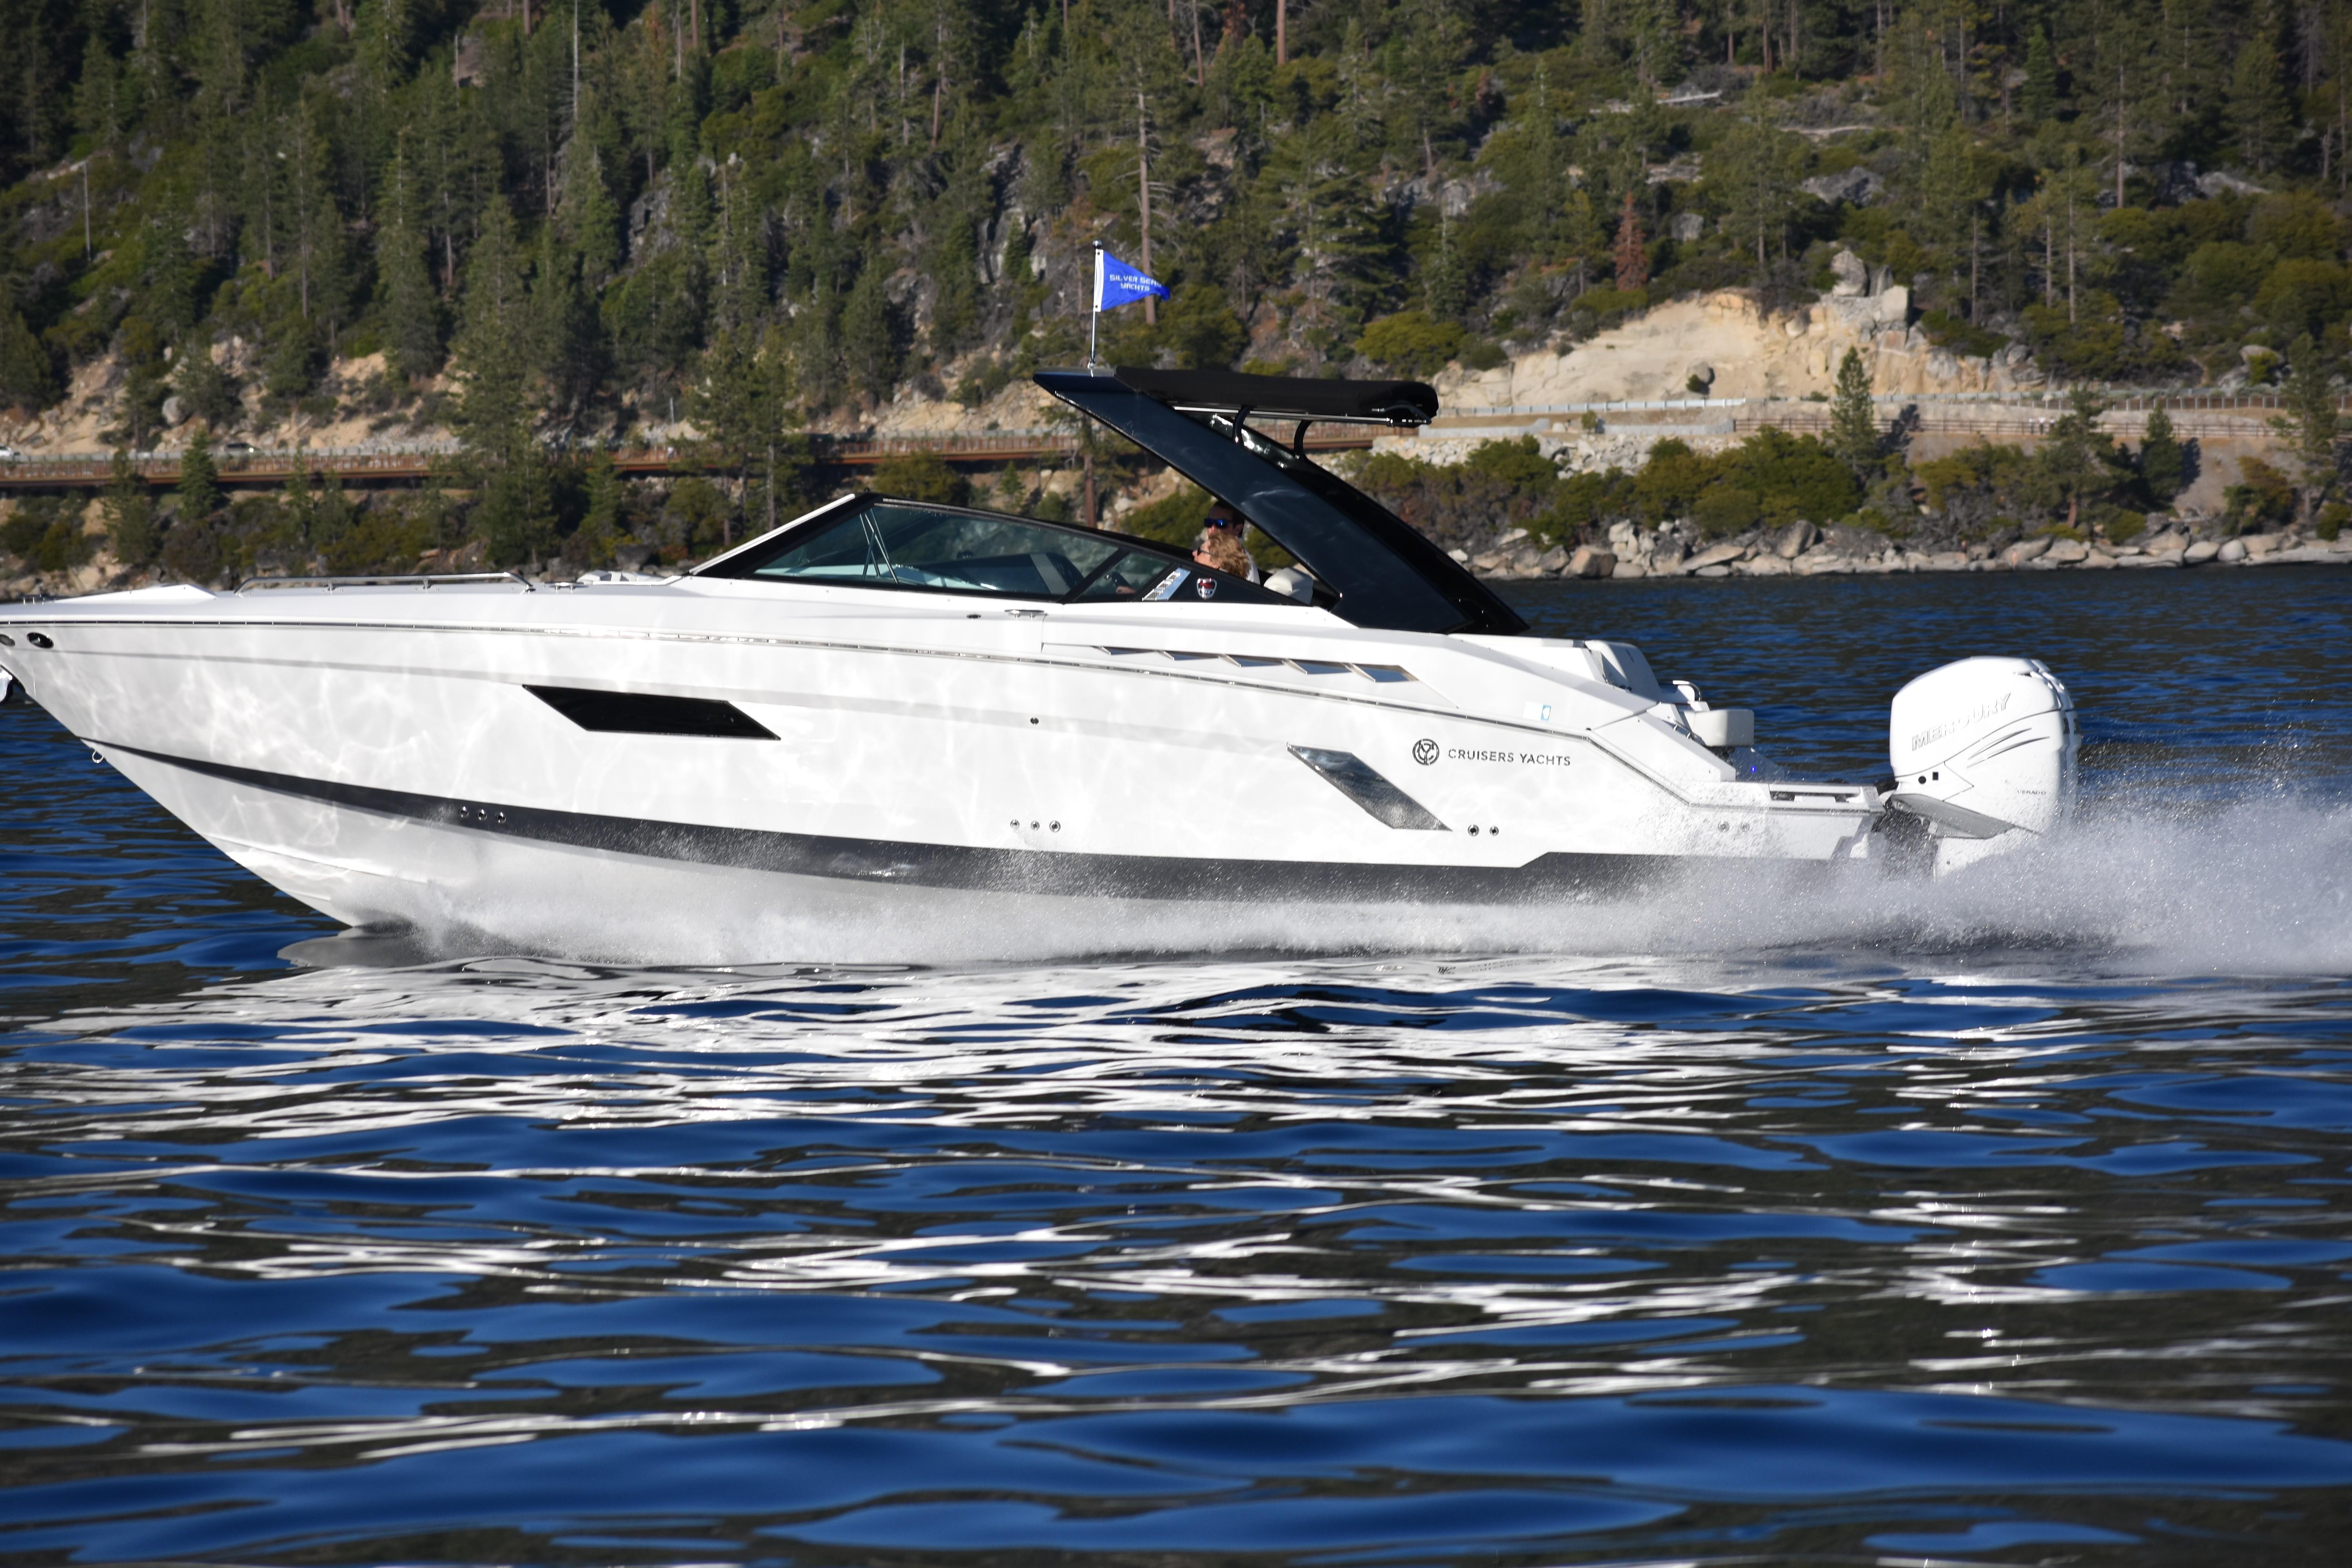 cruisers yachts 338 specs